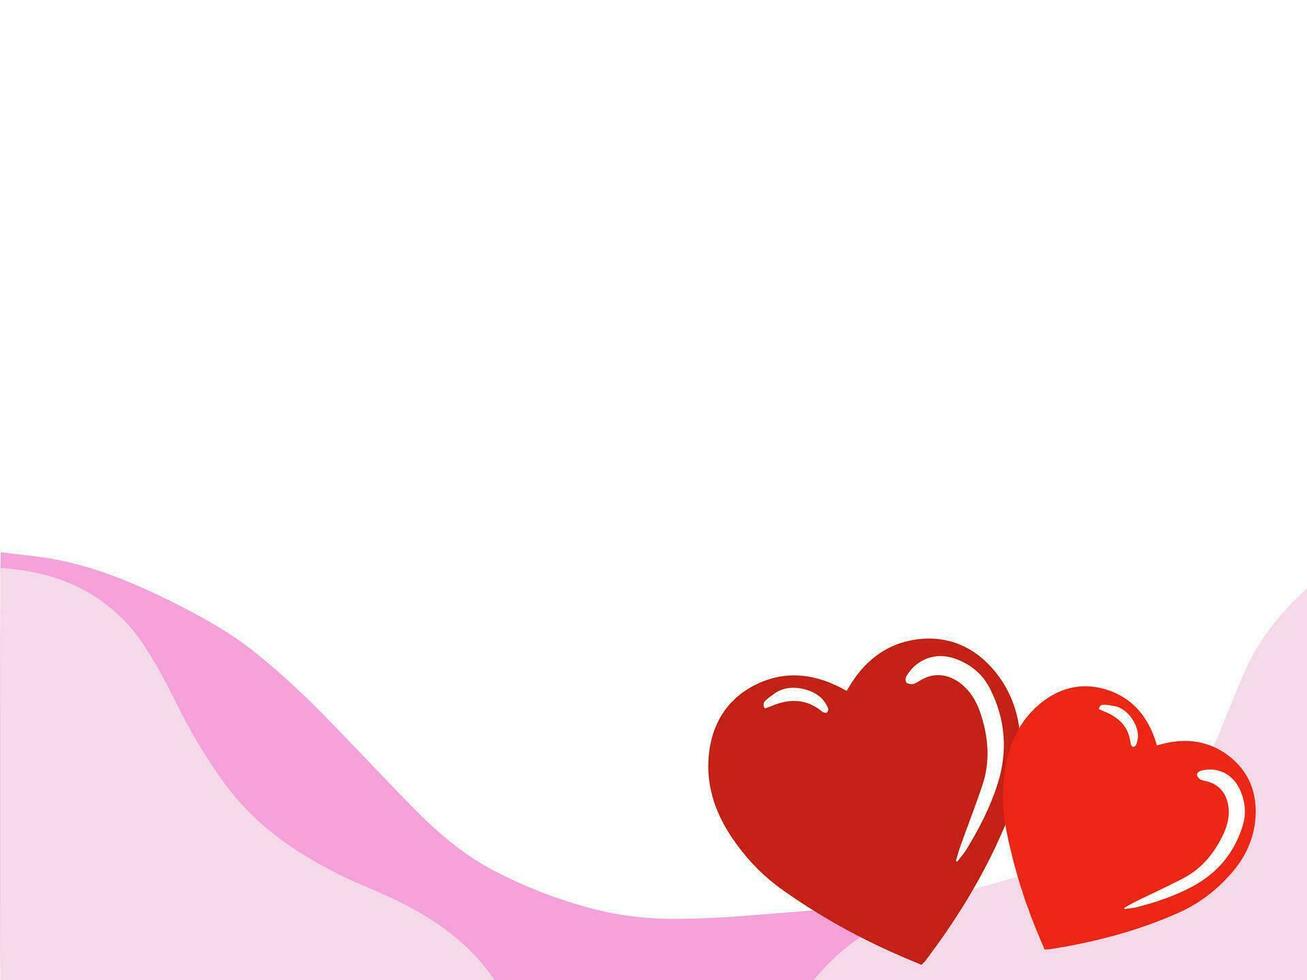 Valentines Heart Background for Decoration vector